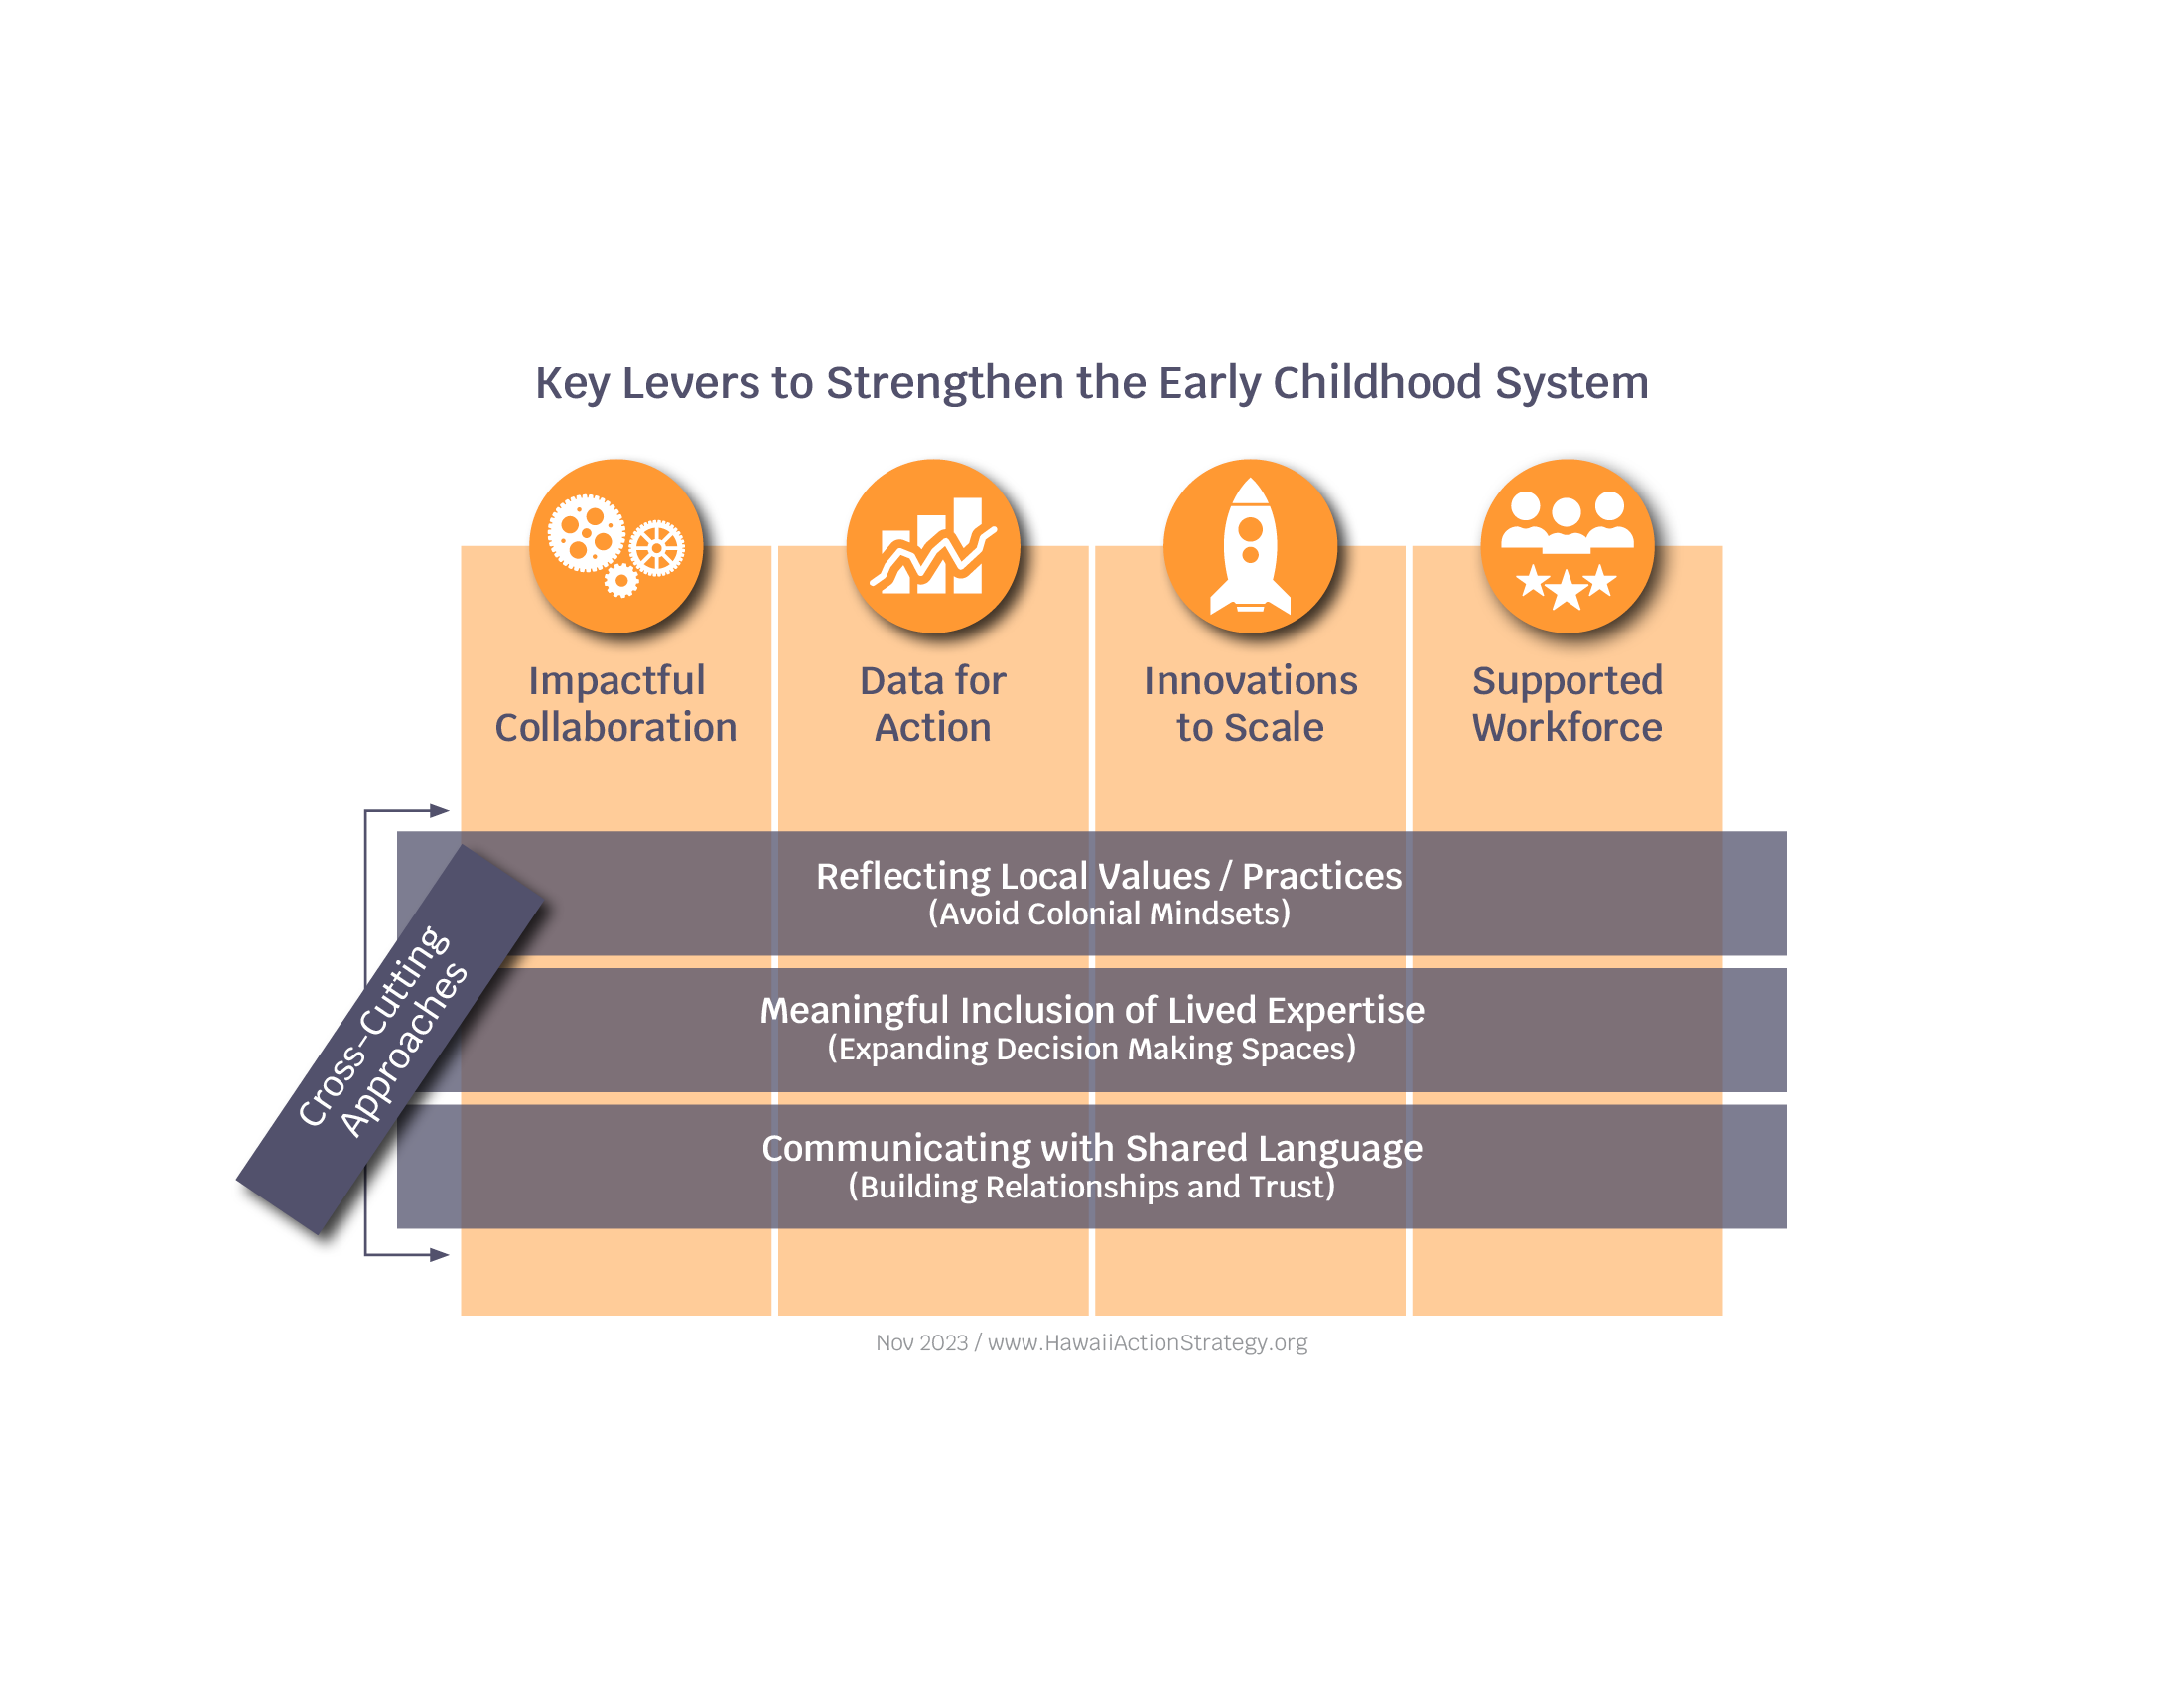 Key levers to strengthen the Early Childhood System